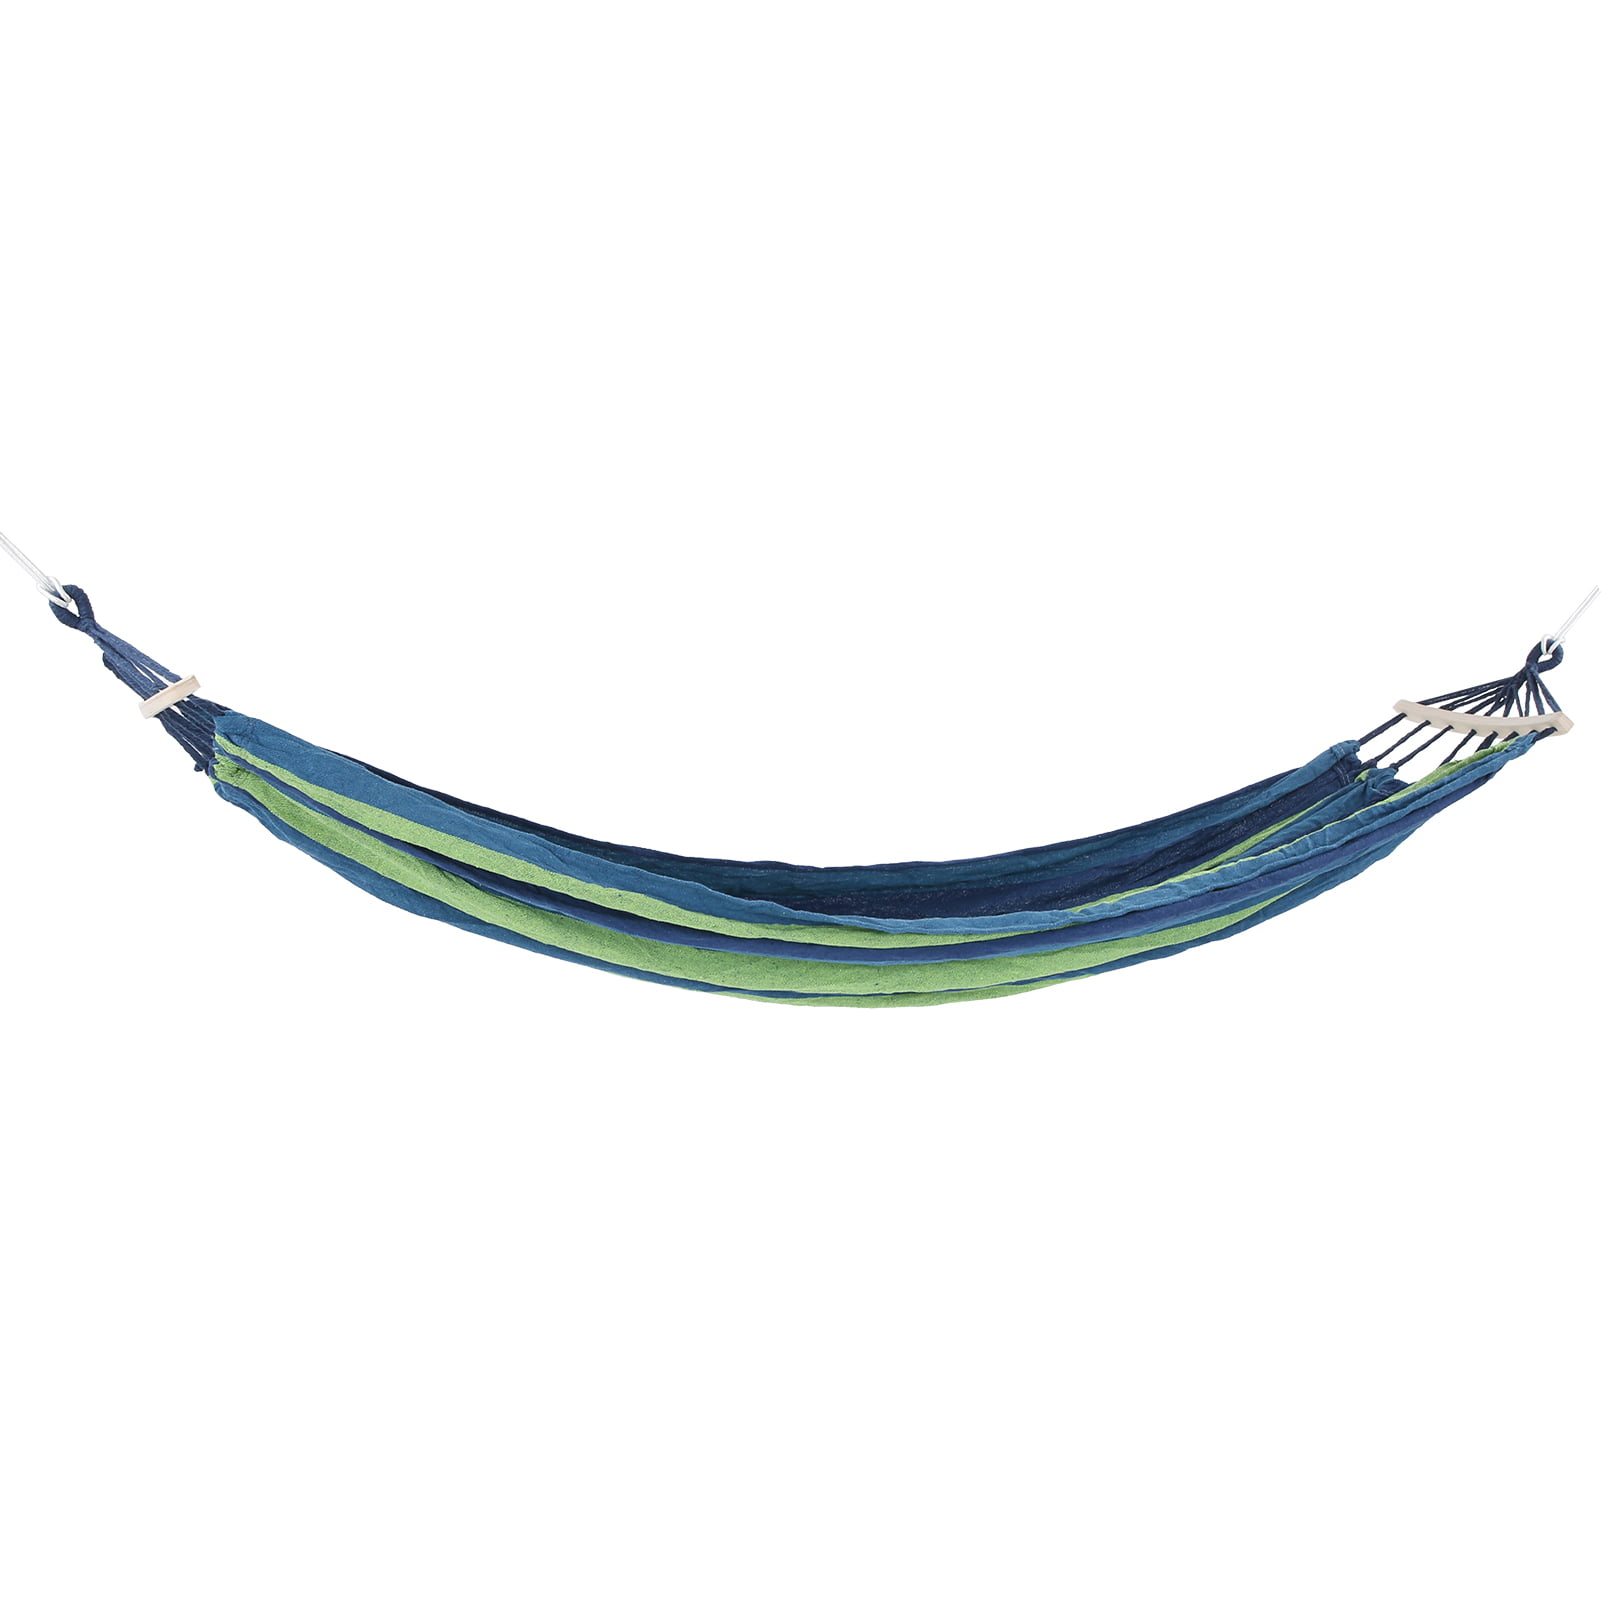 Guidesman™ Nylon Double Hammock green and blue with carabiners holds 2 people 